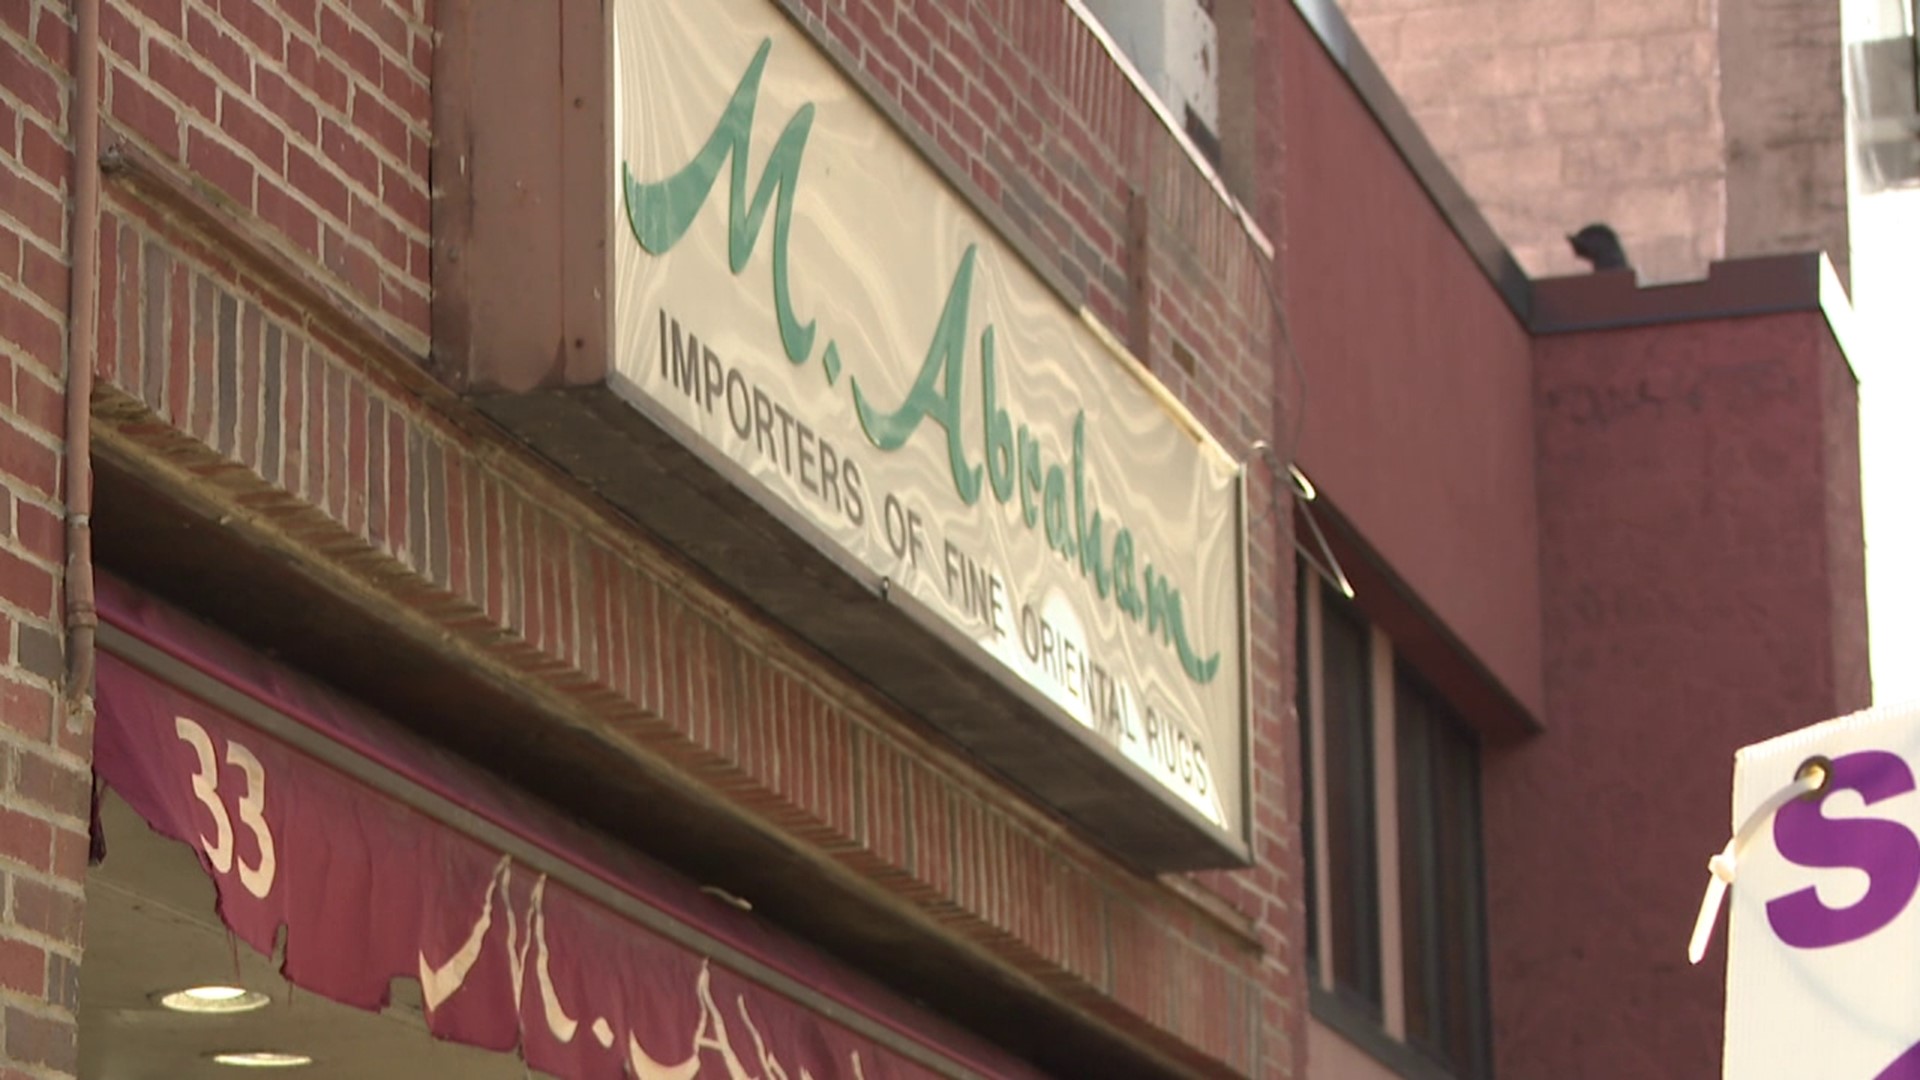 Sunday is the last day for a Wilkes-Barre business that's been around for 95 years.